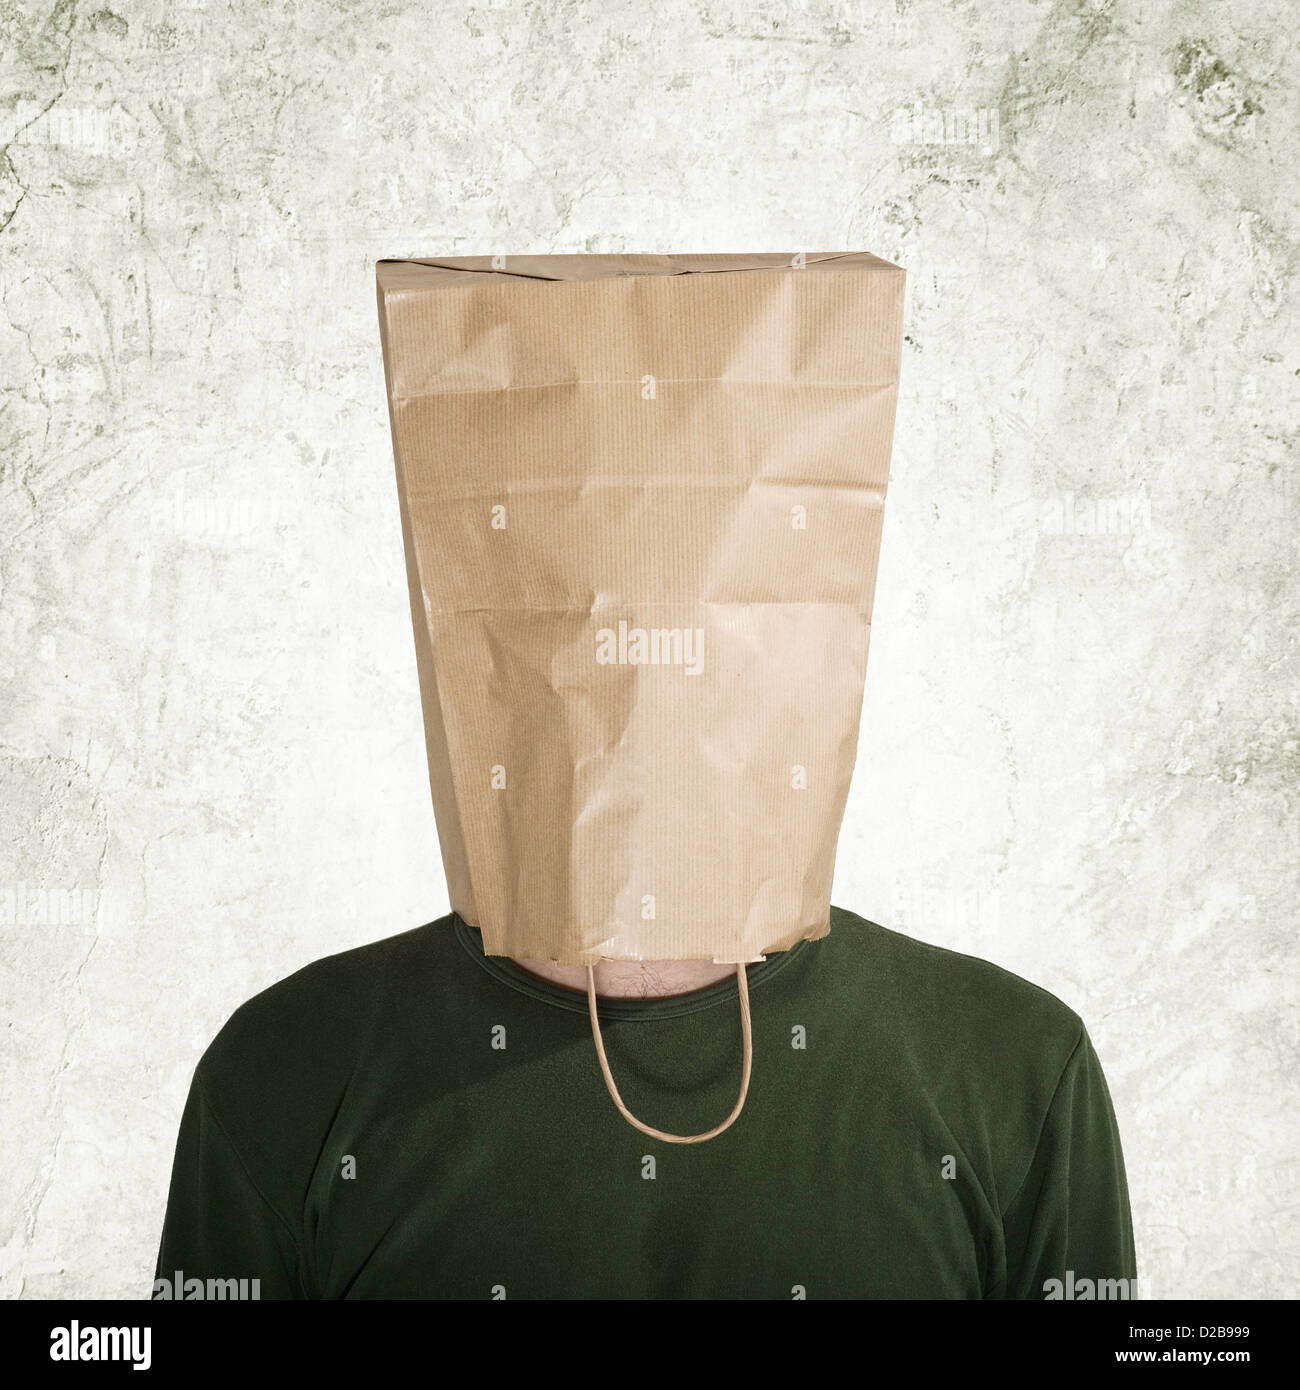 head in the paper bag, man hidden behind the shopping bag. Stock Photo